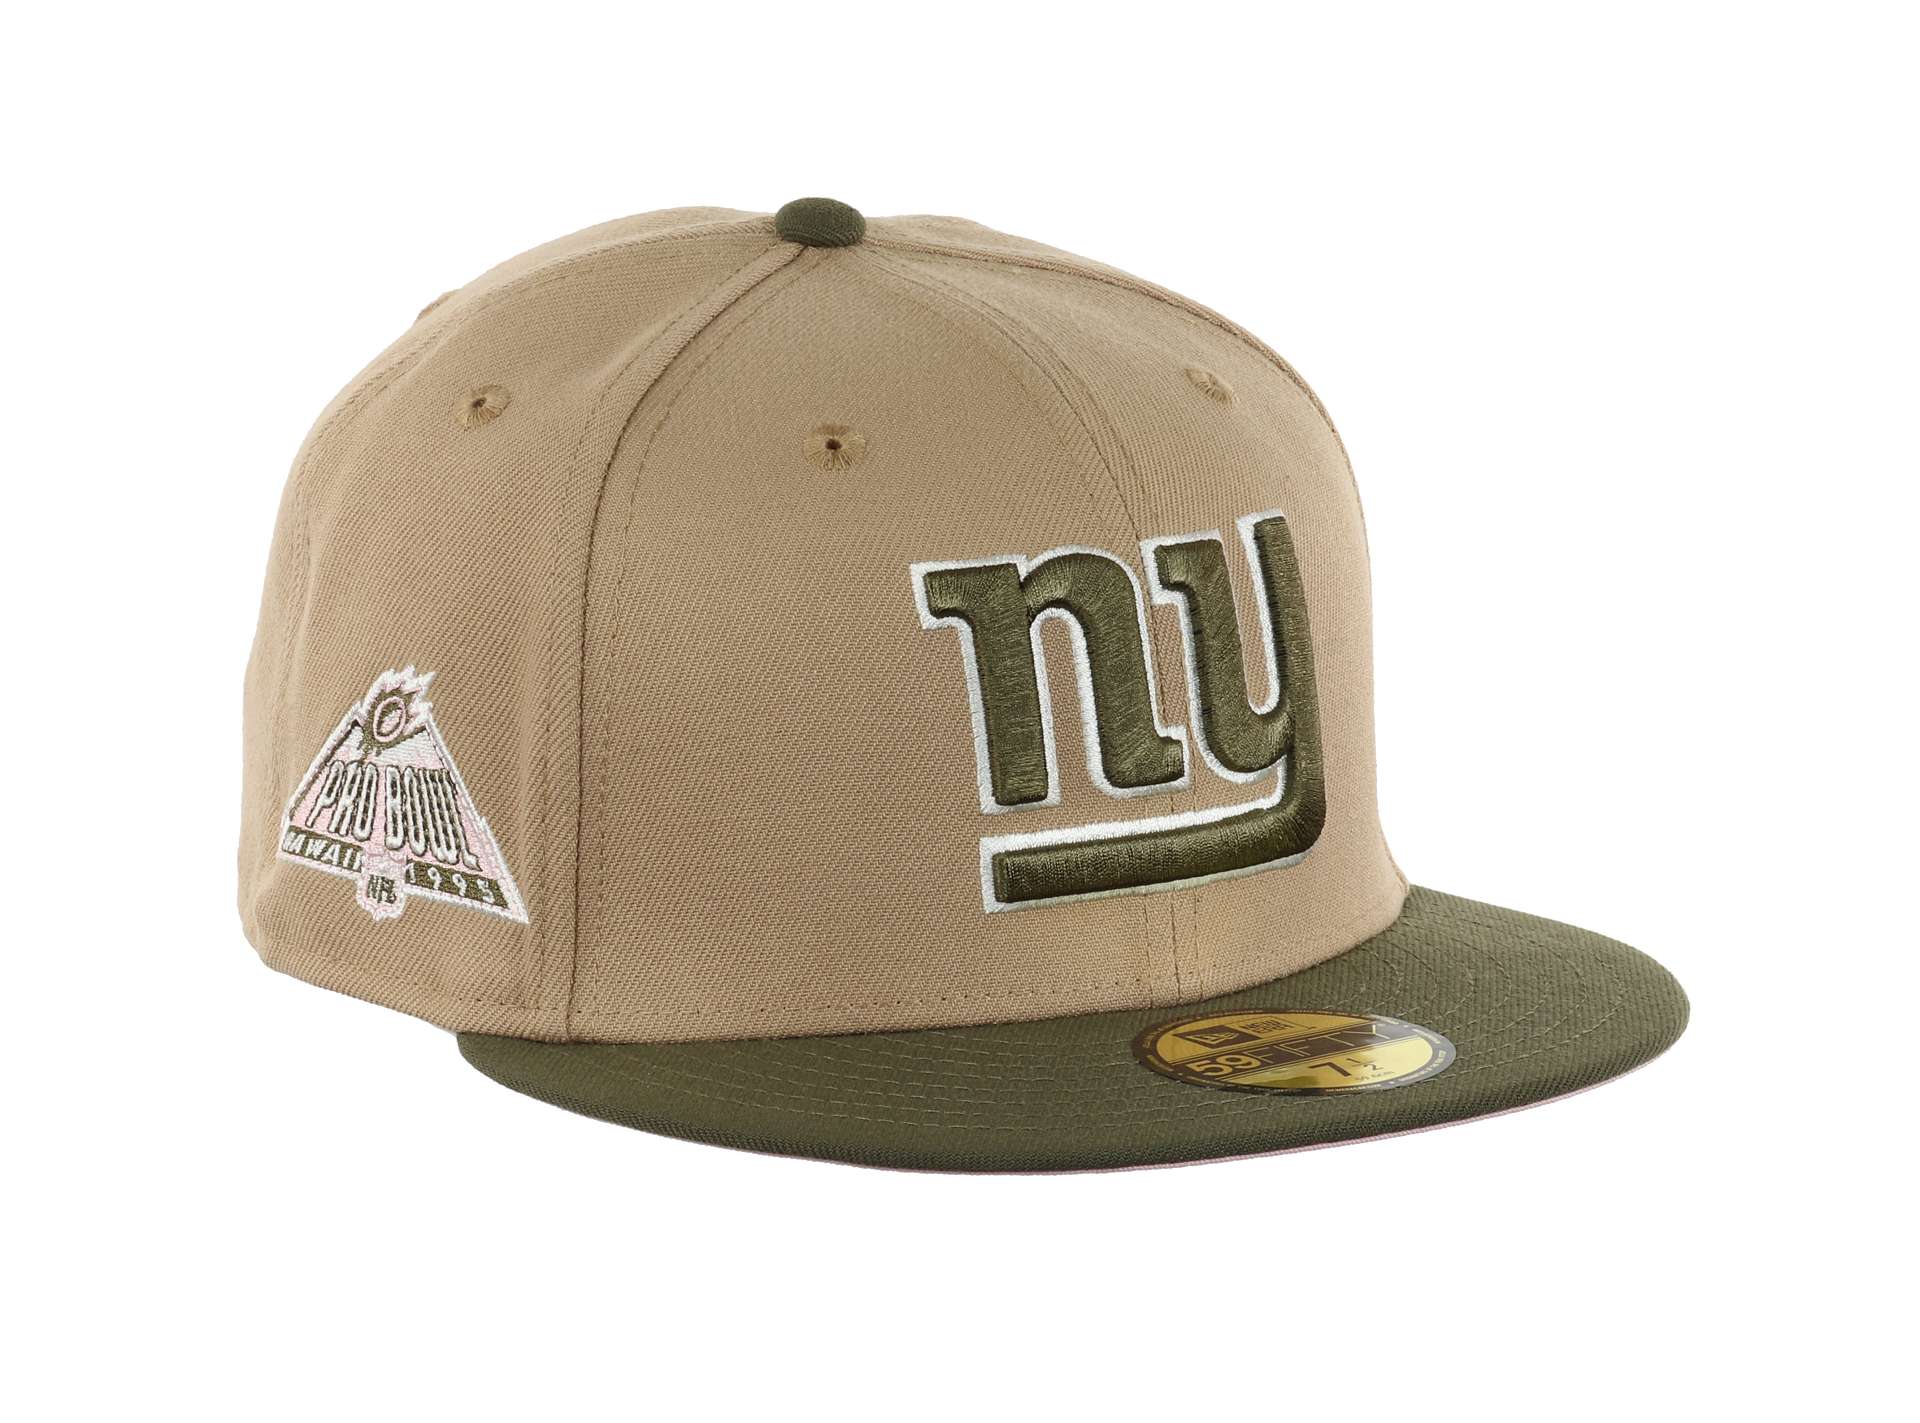 New York Giants NFL Pro Bowl Hawaii 1995 Sidepatch Camel Olive 59Fifty Basecap New Era